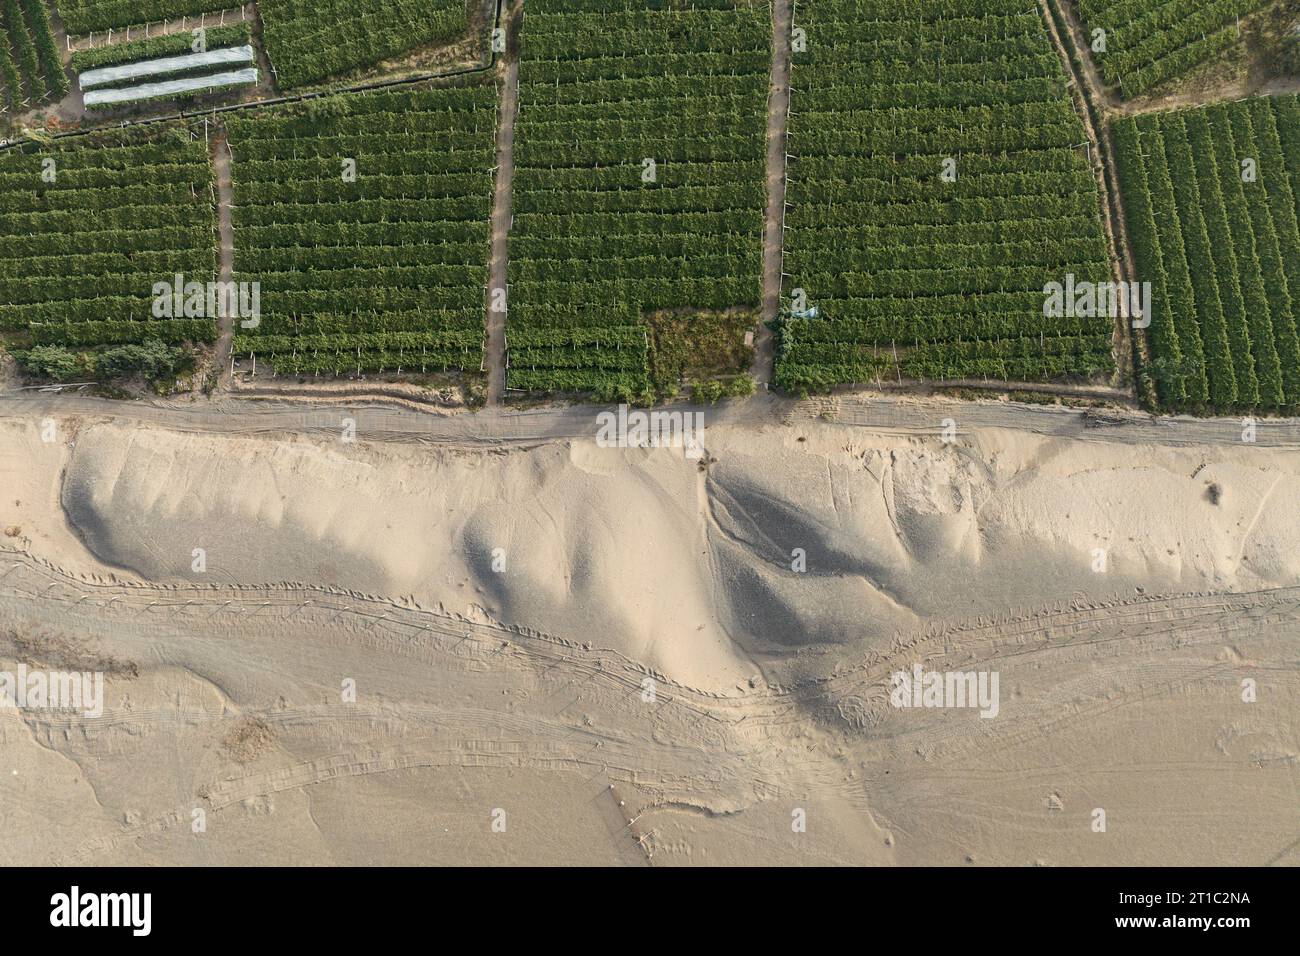 Photo of a vineyard in a desert landscape captured from above, Gansu - China Stock Photo